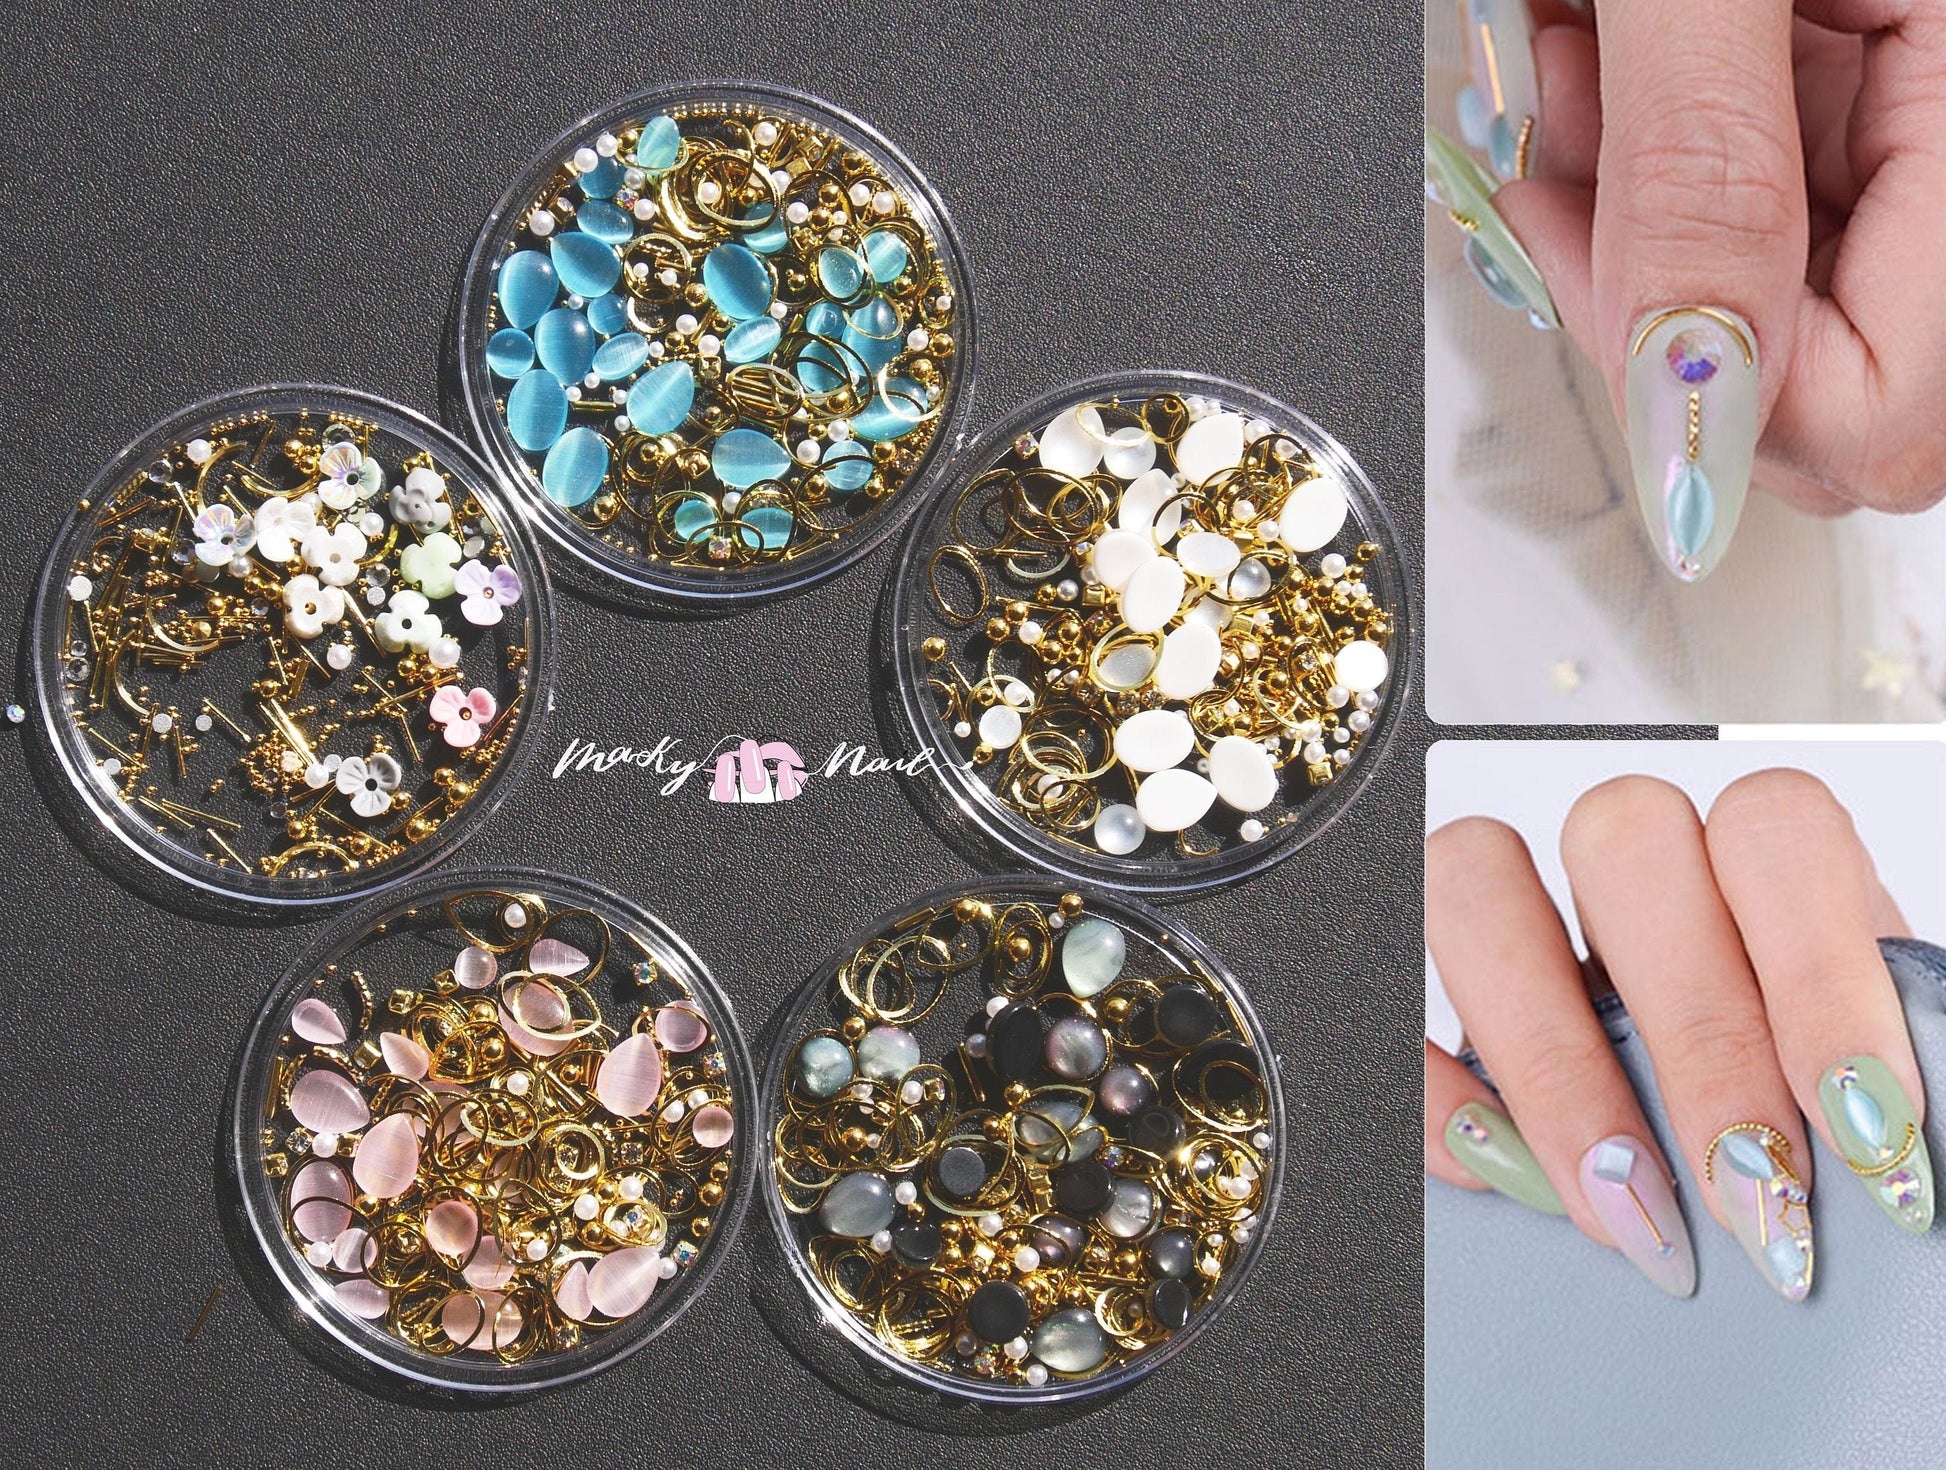 About artificial nail decorative stones and their use